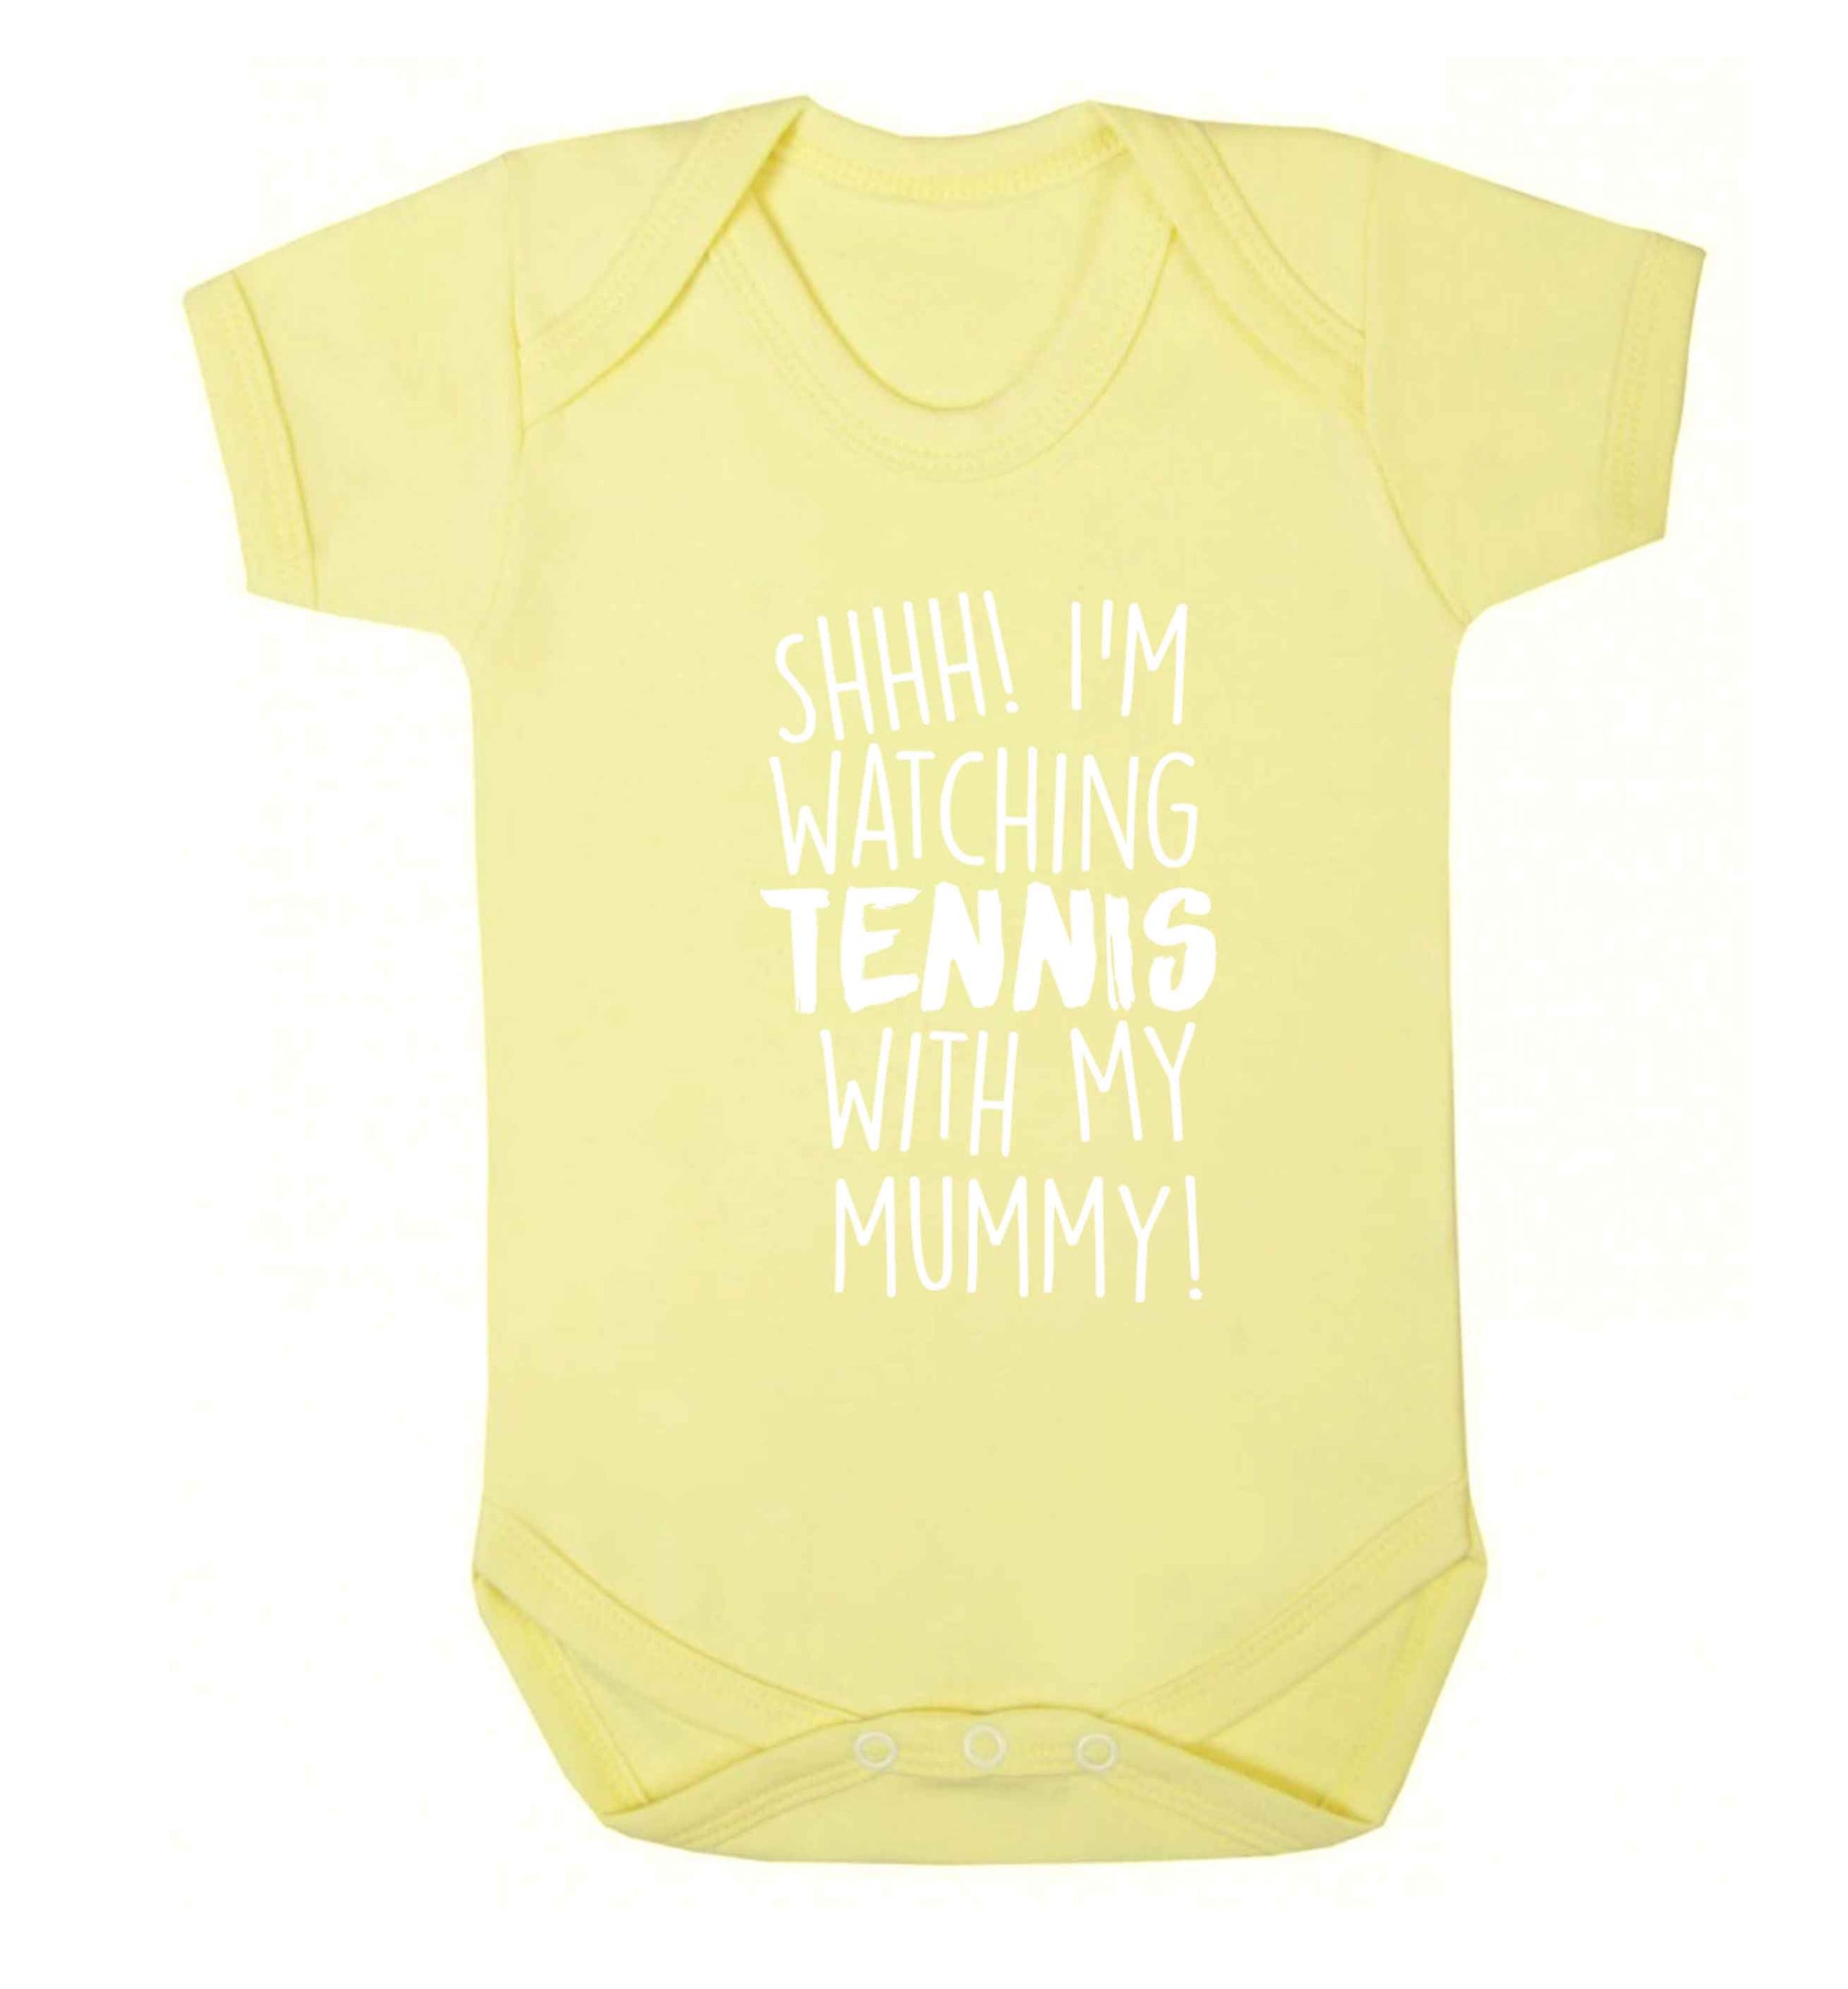 Shh! I'm watching tennis with my mummy! Baby Vest pale yellow 18-24 months